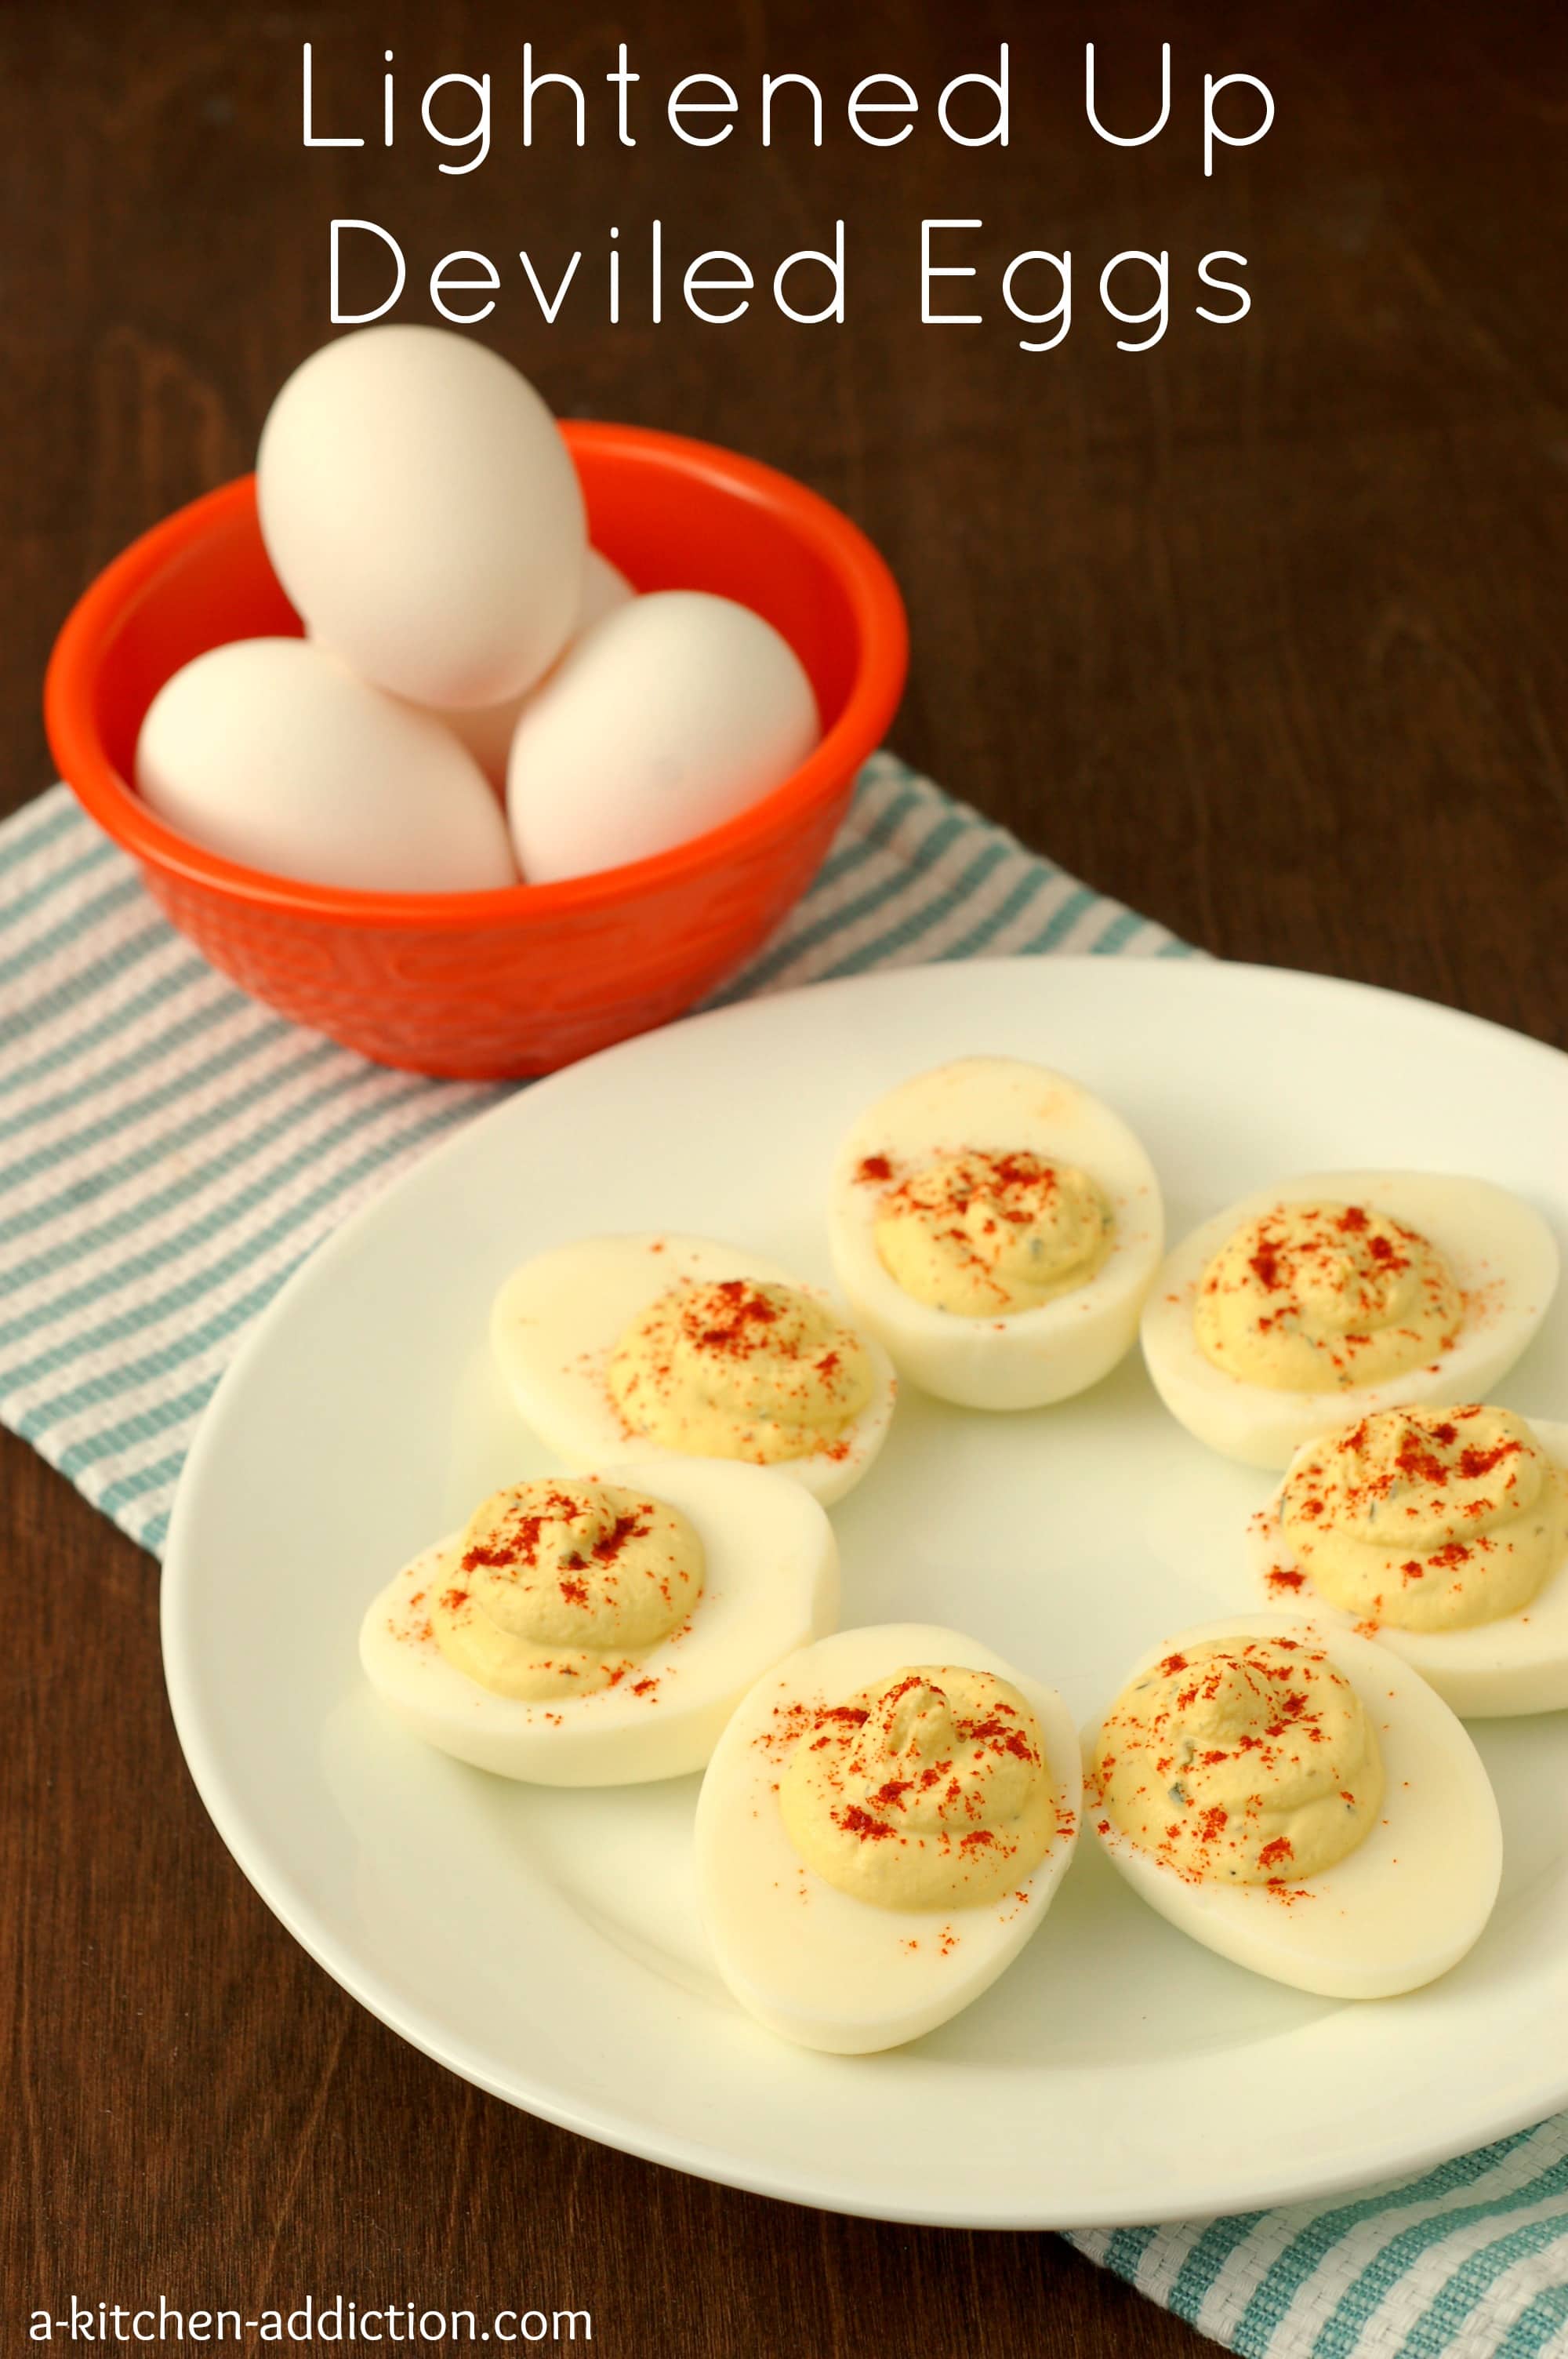 Easy Peel Hard Boiled Eggs  Serena Bakes Simply From Scratch